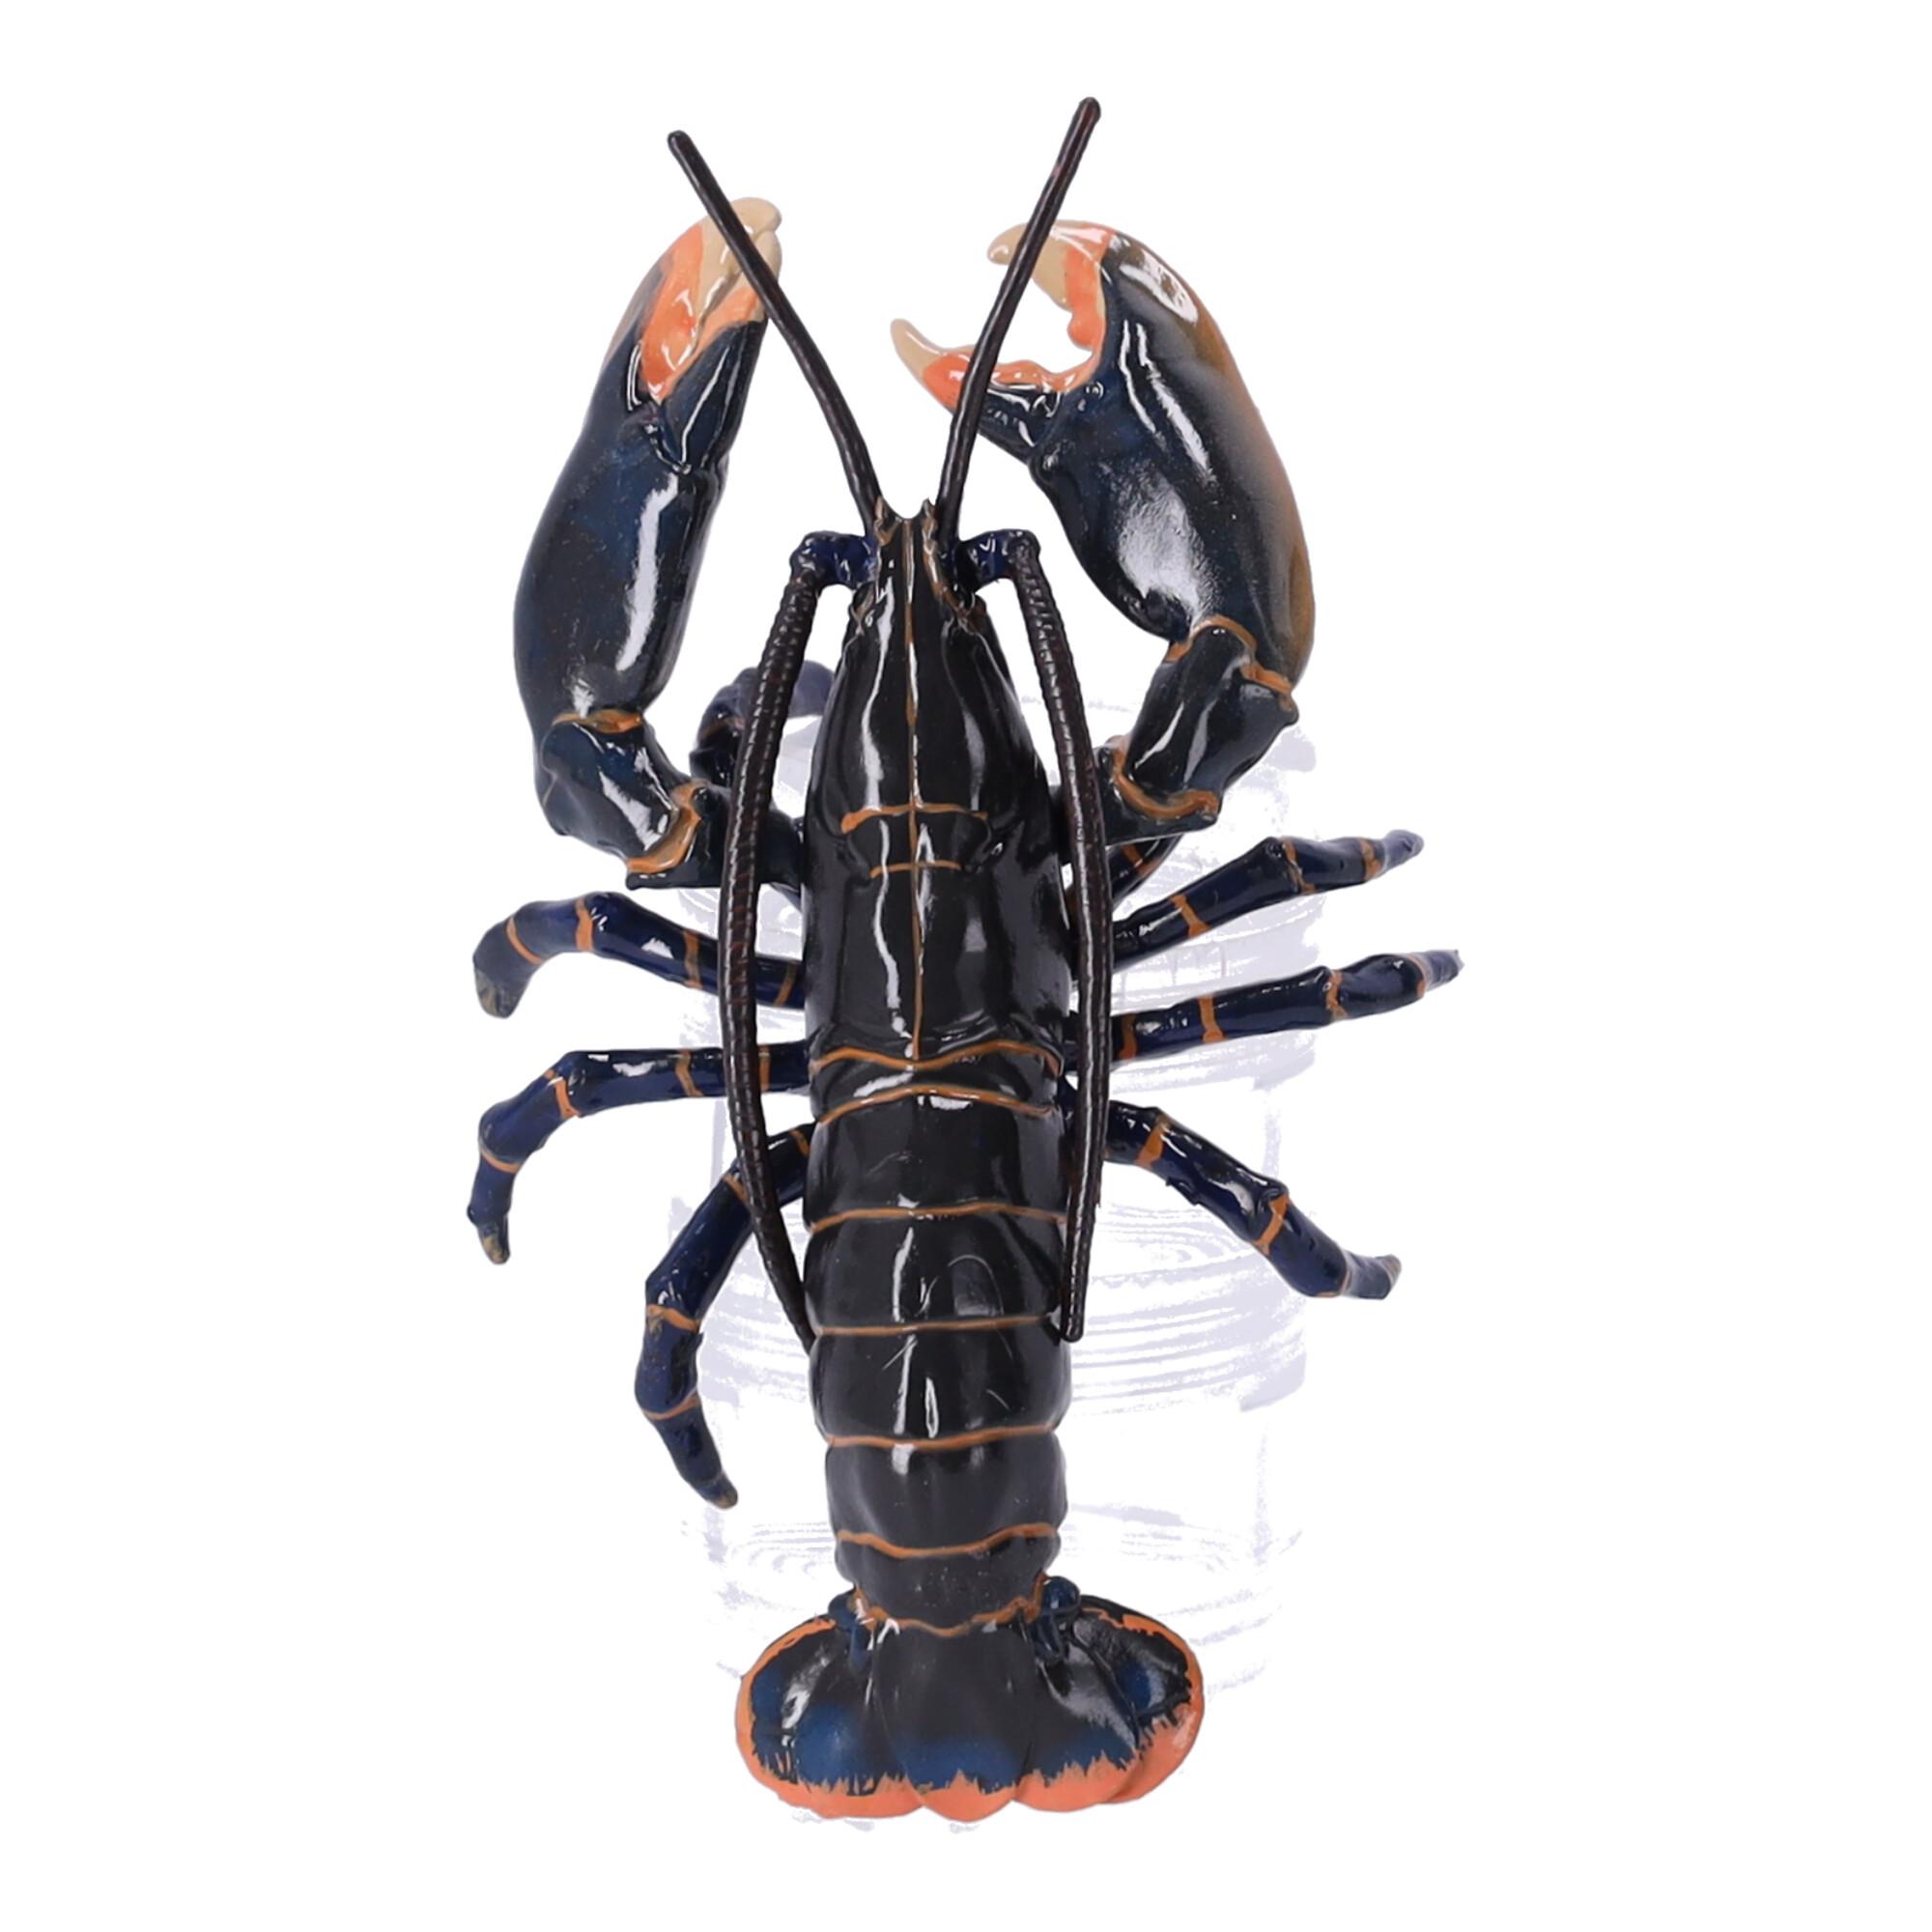 Collectible figurine Lobster, Papo